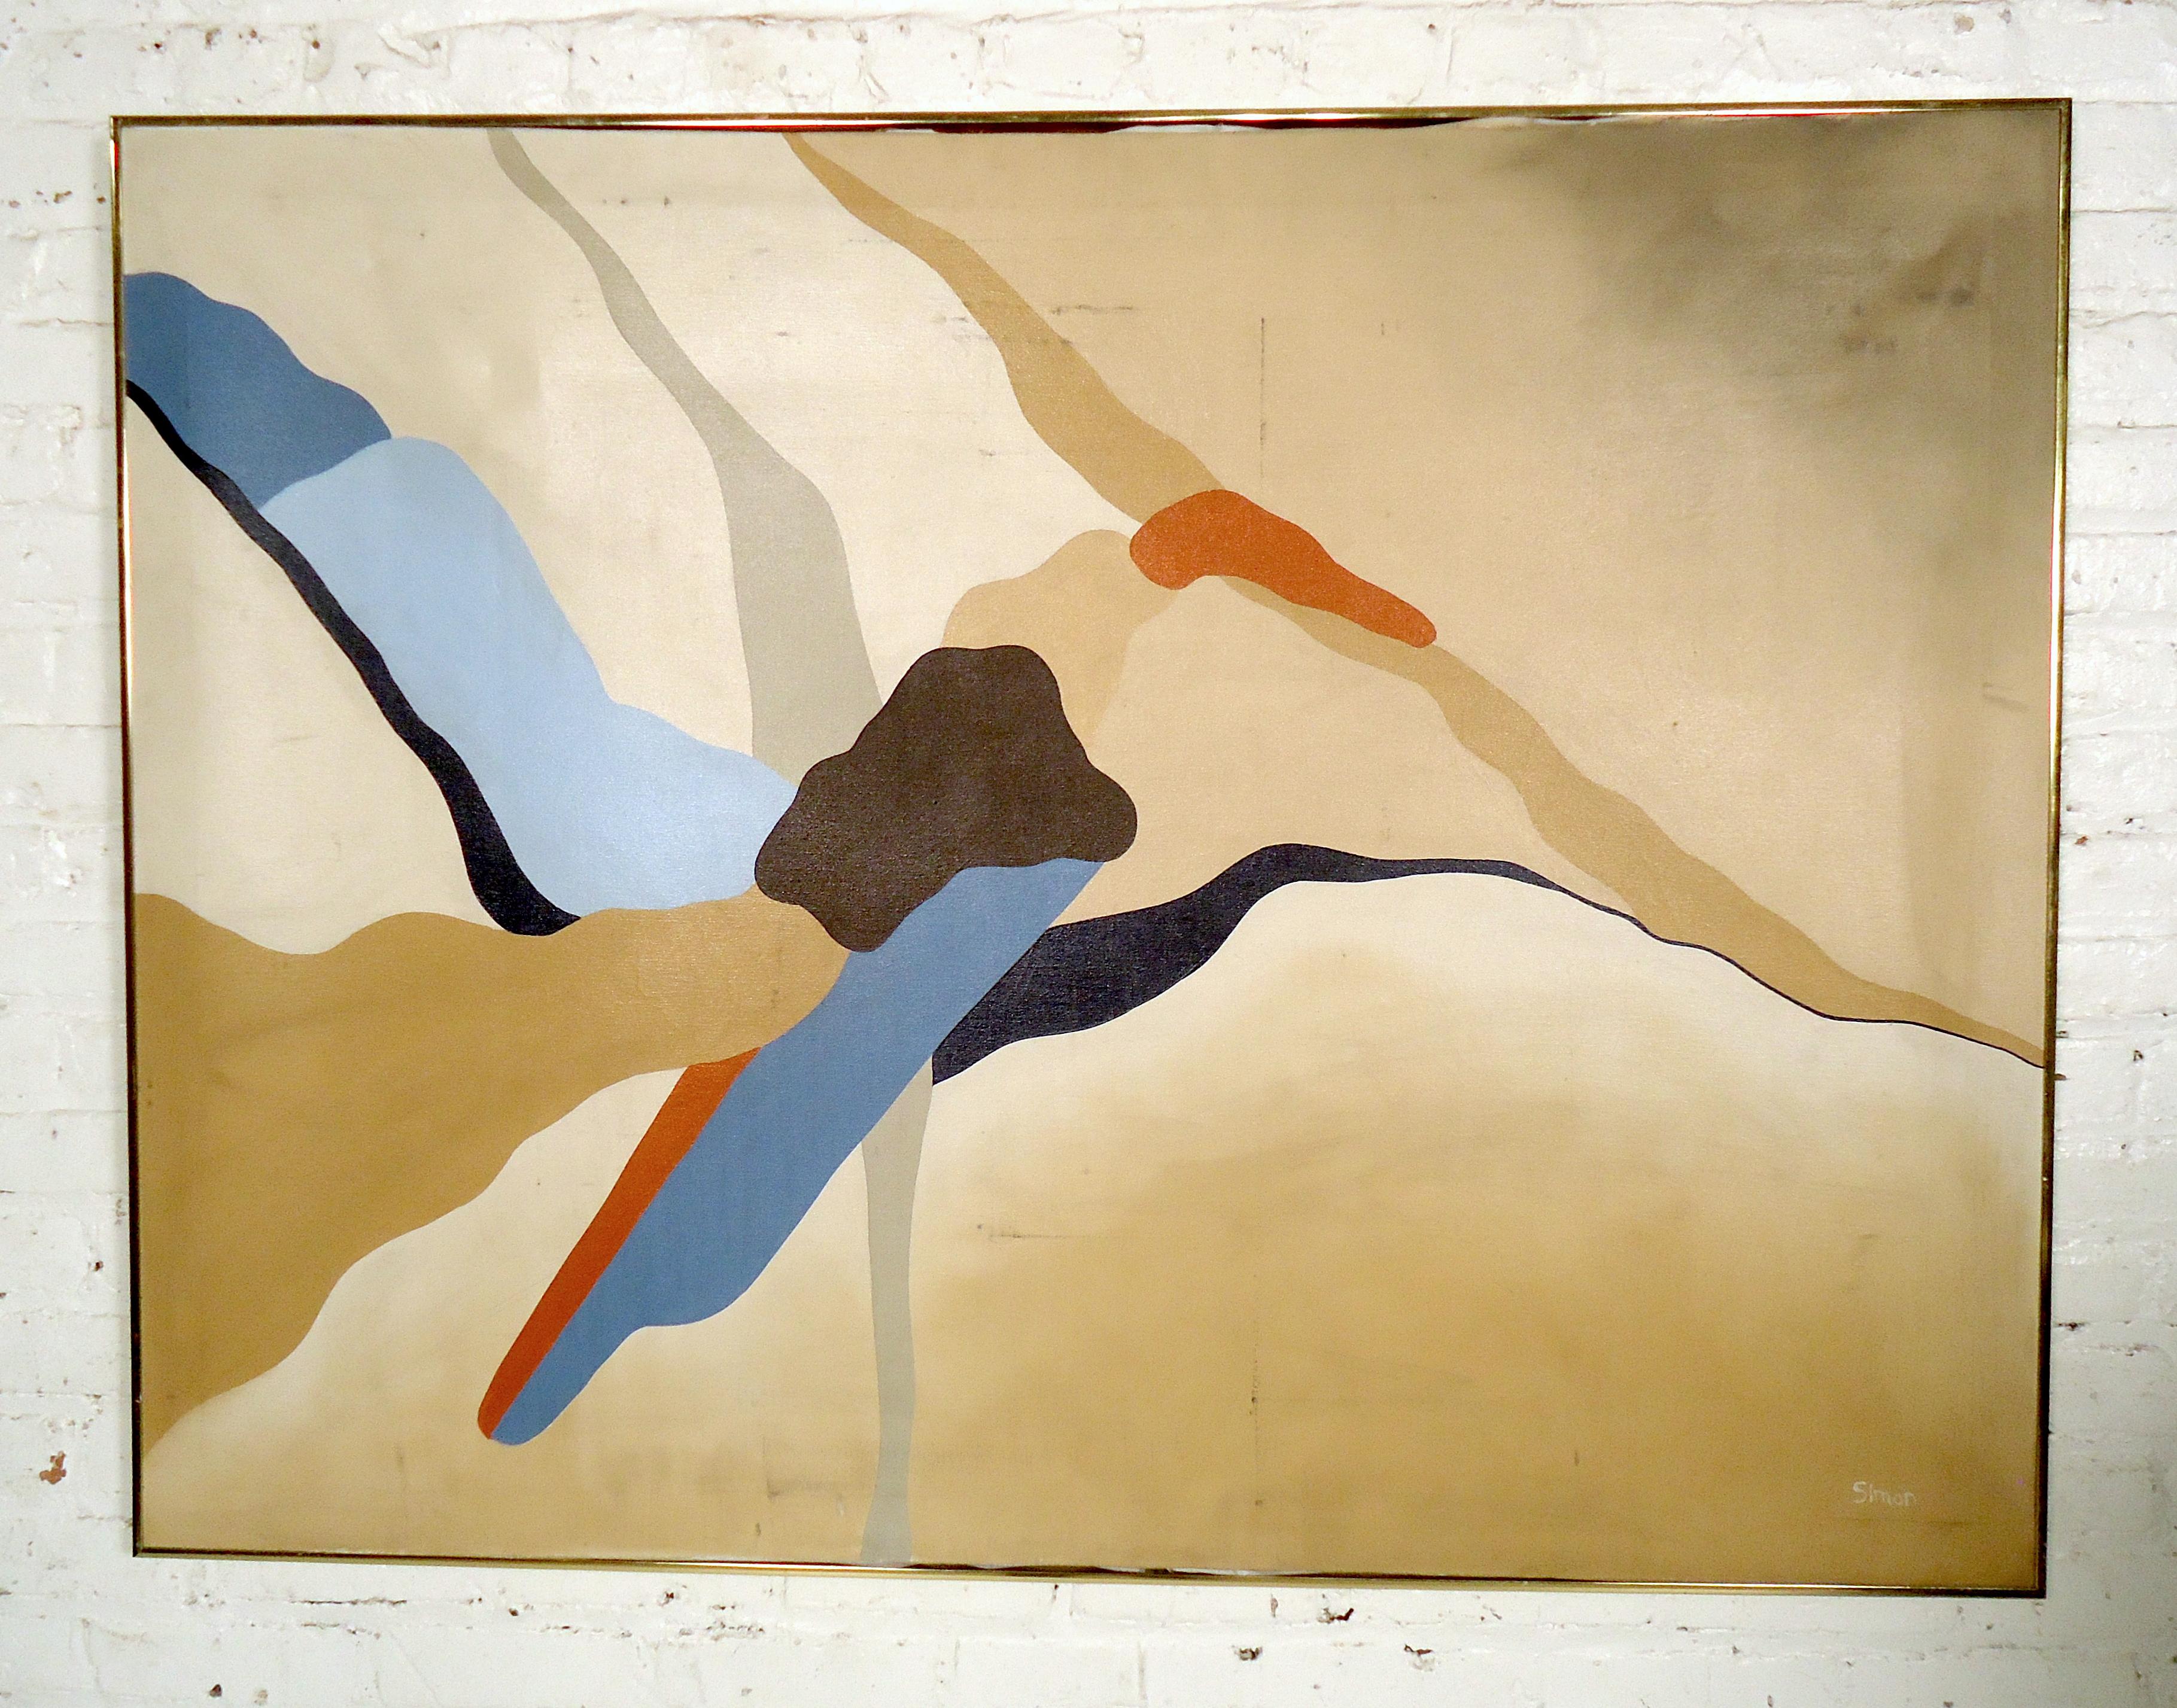 Framed Mid-Century Modern abstract painting signed by Simon.
(Please confirm item location - NY or NJ - with dealer).